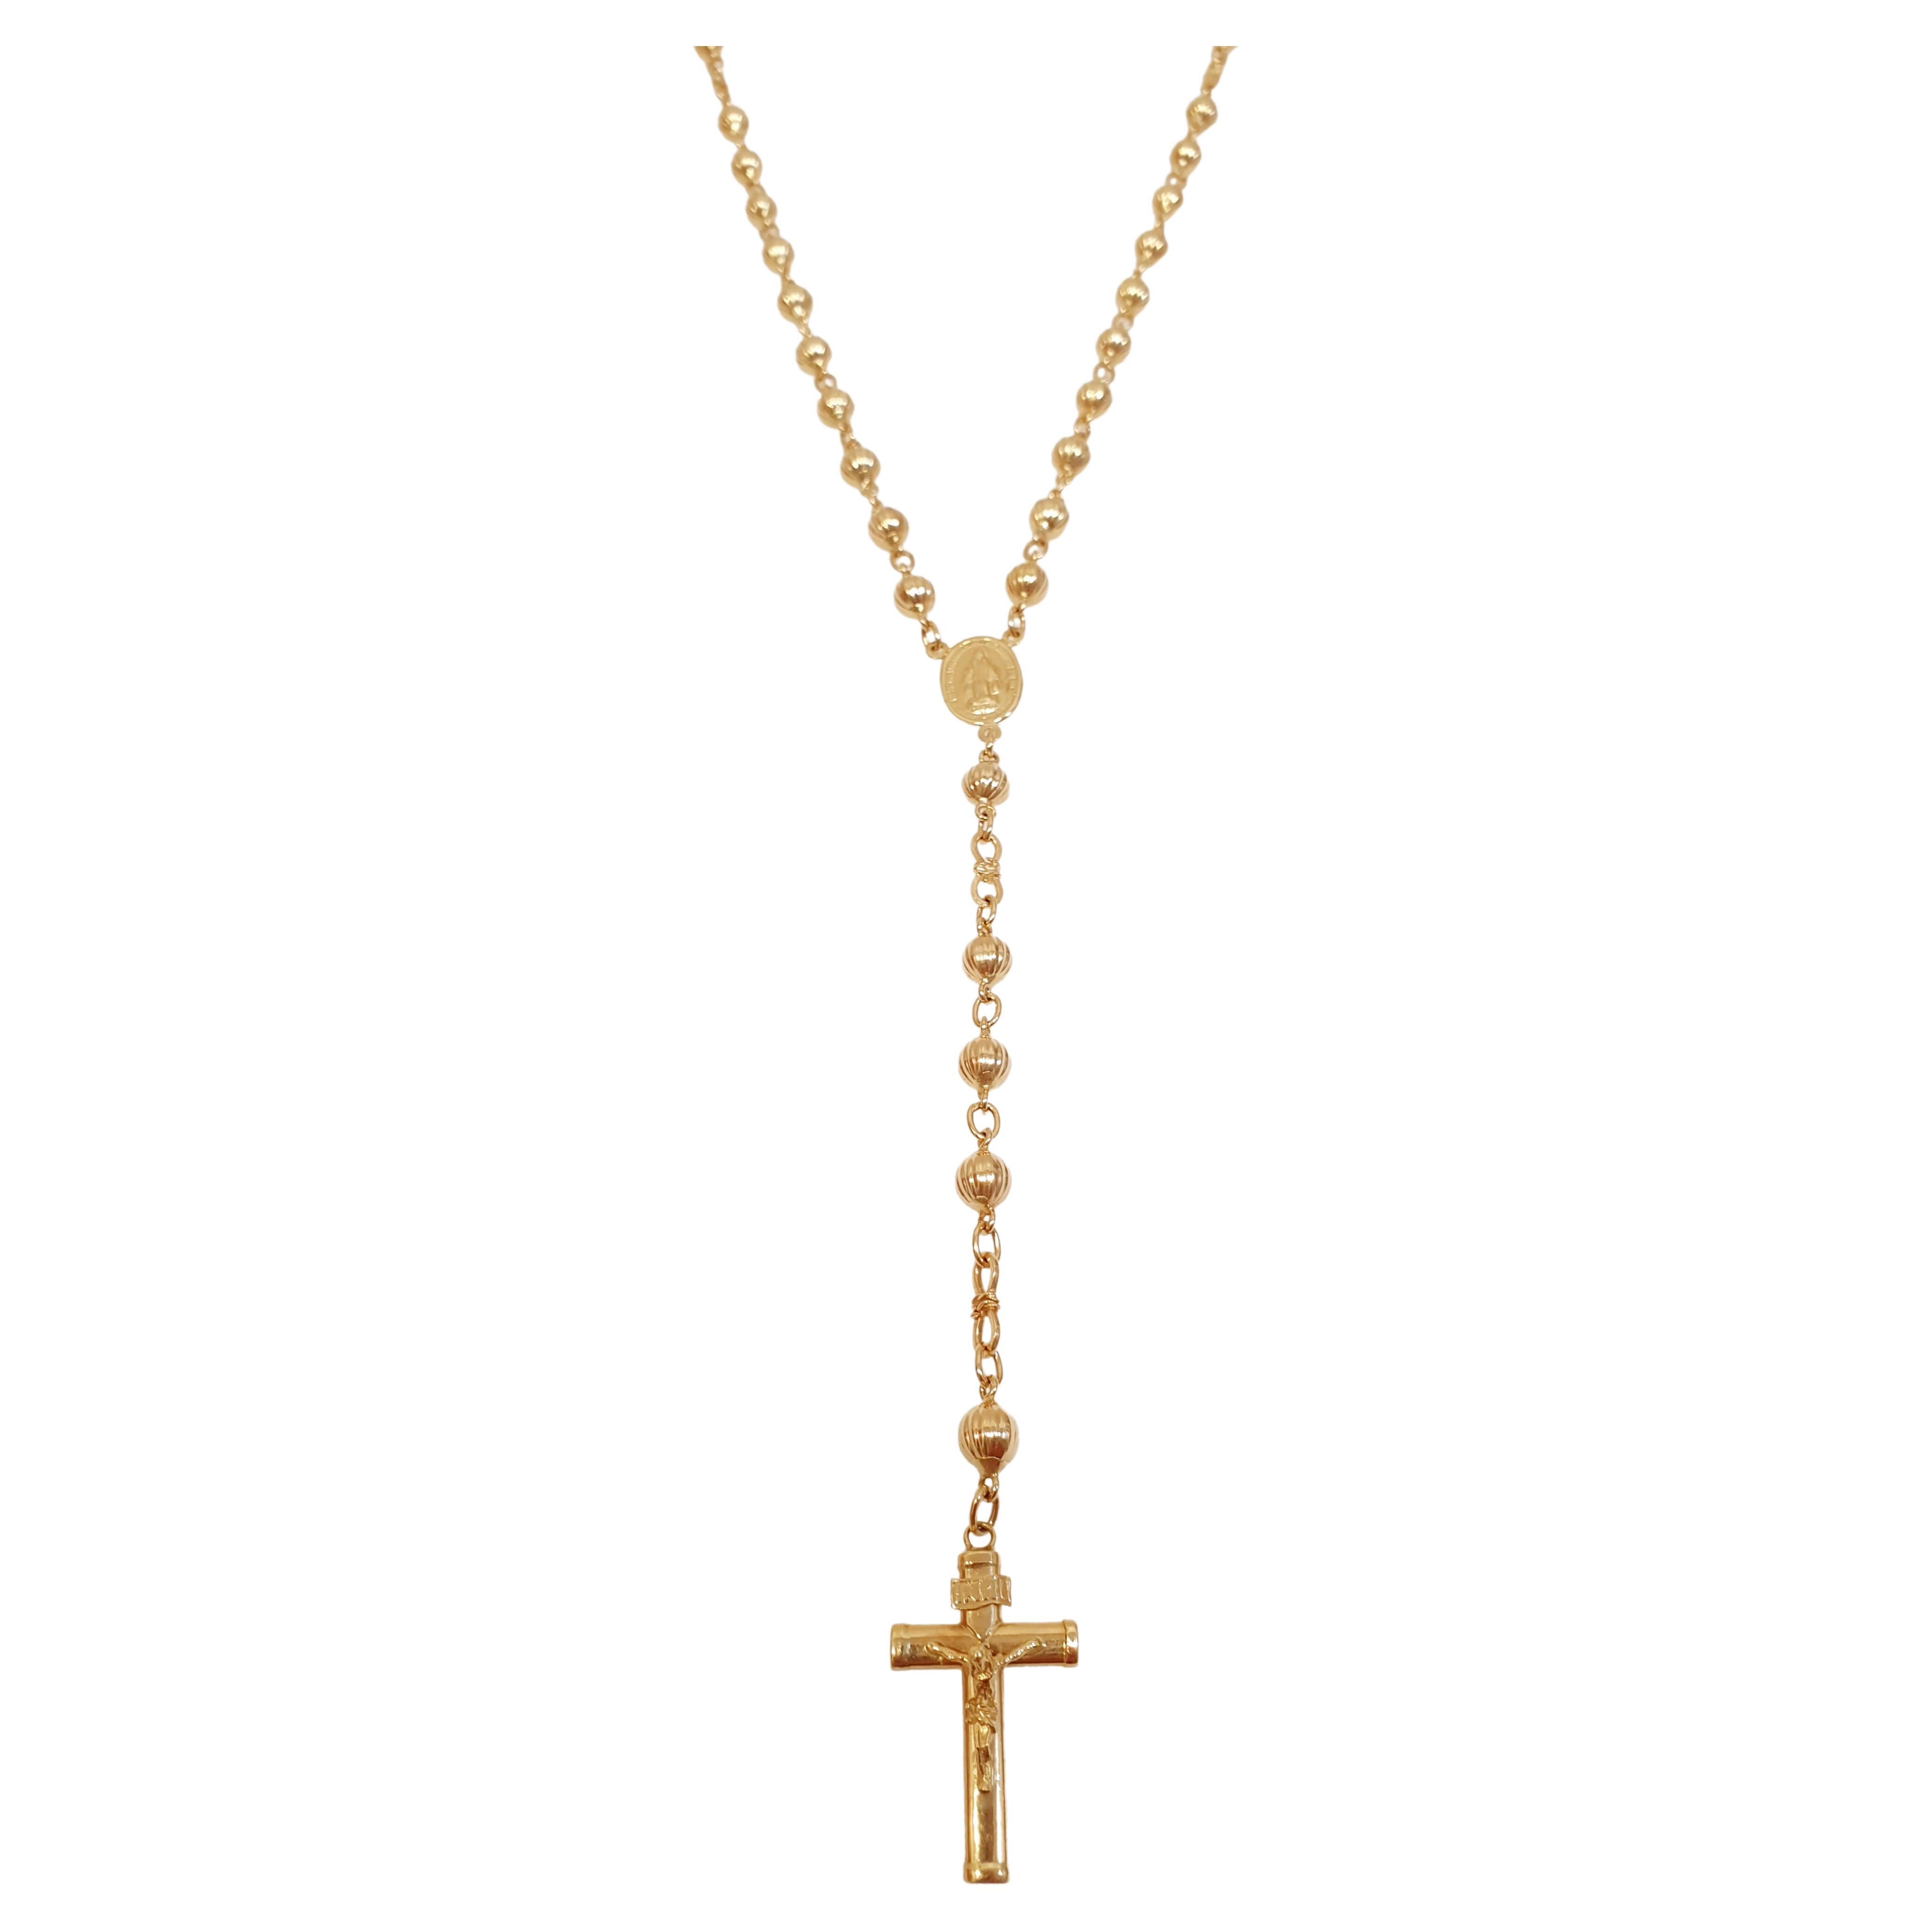 Rosary Necklace in 18K Gold and Onyx
 Rosary Necklace Unisex Woman Man with Virgin Mary Miraculous Medal and Cross
18kt rose gold with Onyx with brilliant and satin finish
Weight: grams 11
Length to virgin  52cm  
Length from the Virgin to the Cross